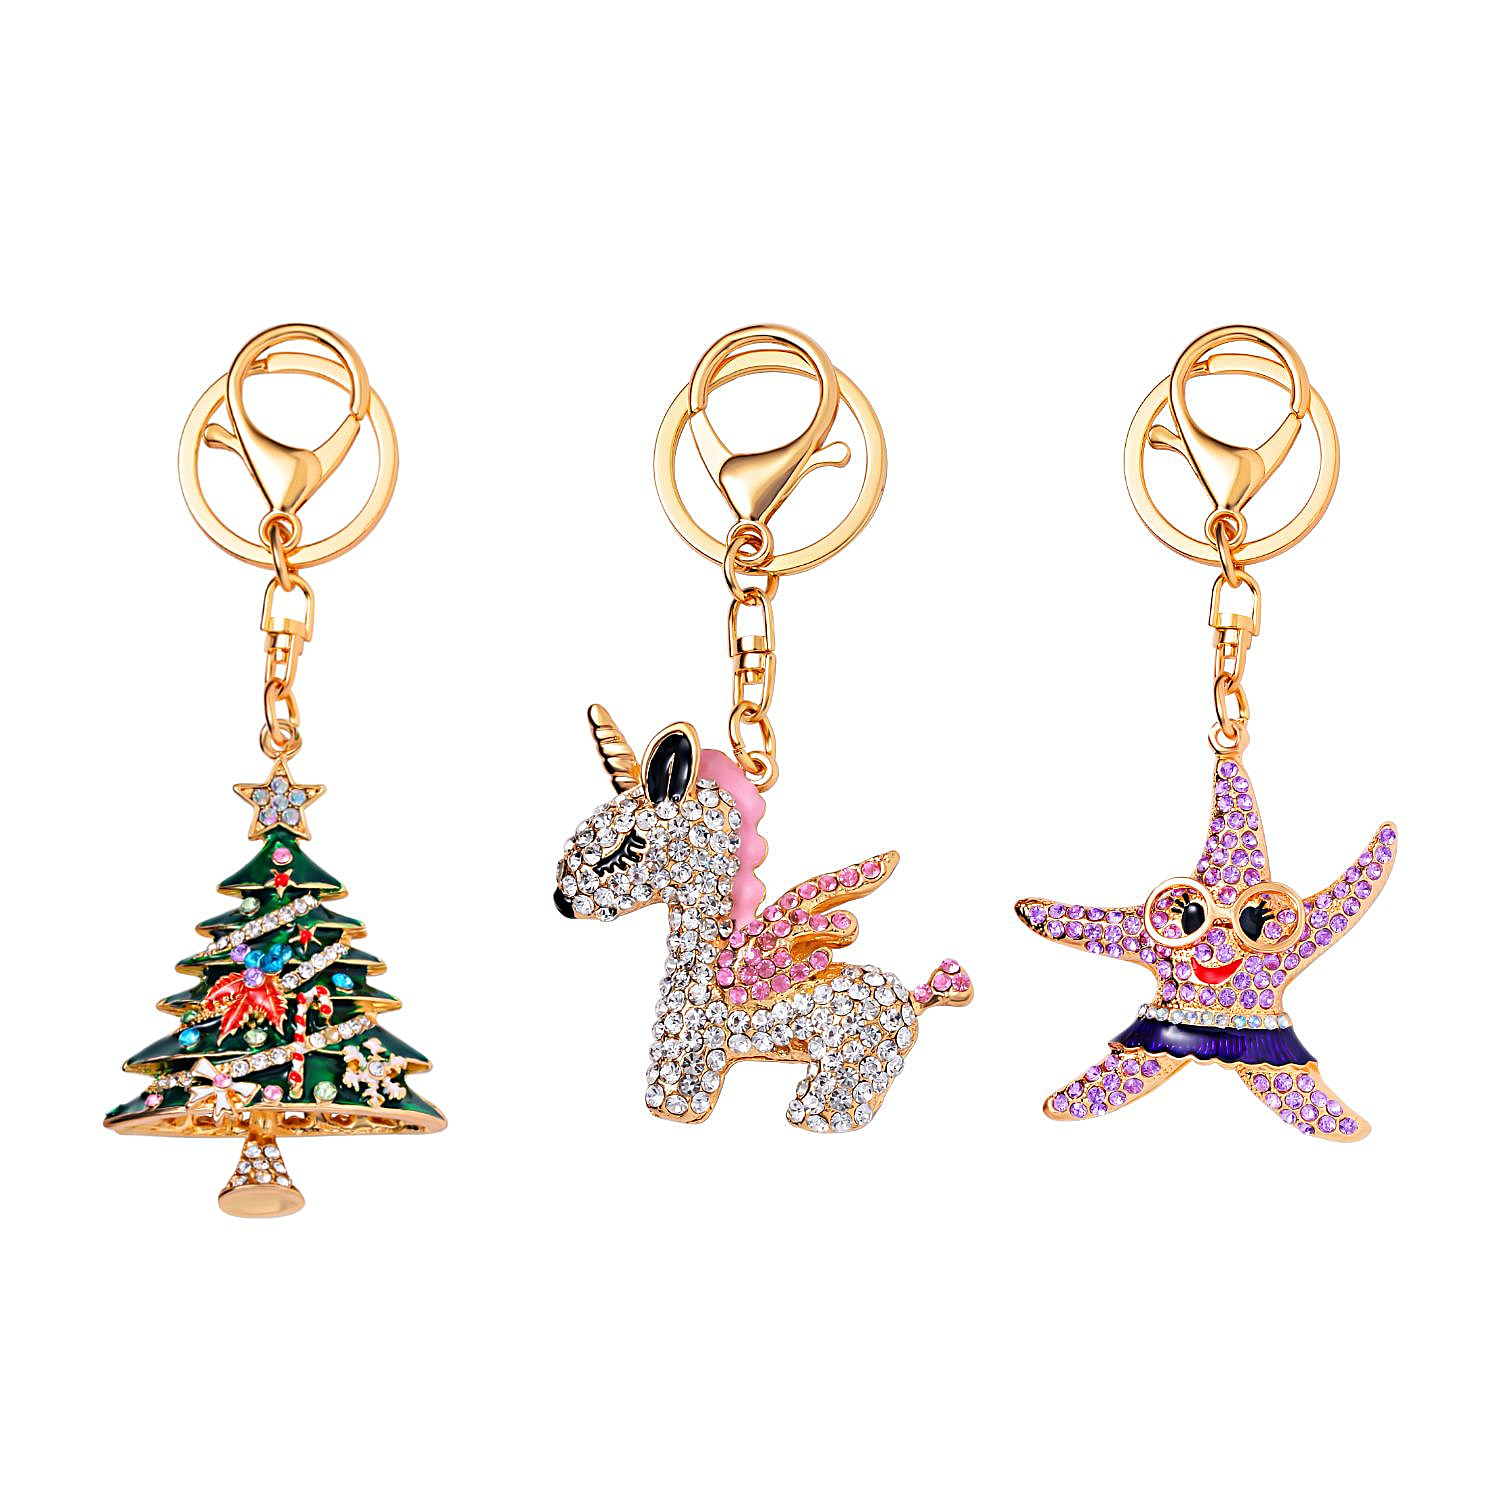 Value Bundle -  Set of 3 Sparkling Crystal Keychains With Different Designs (Unicorn, Christmas Tree, and Starfish) - Multi